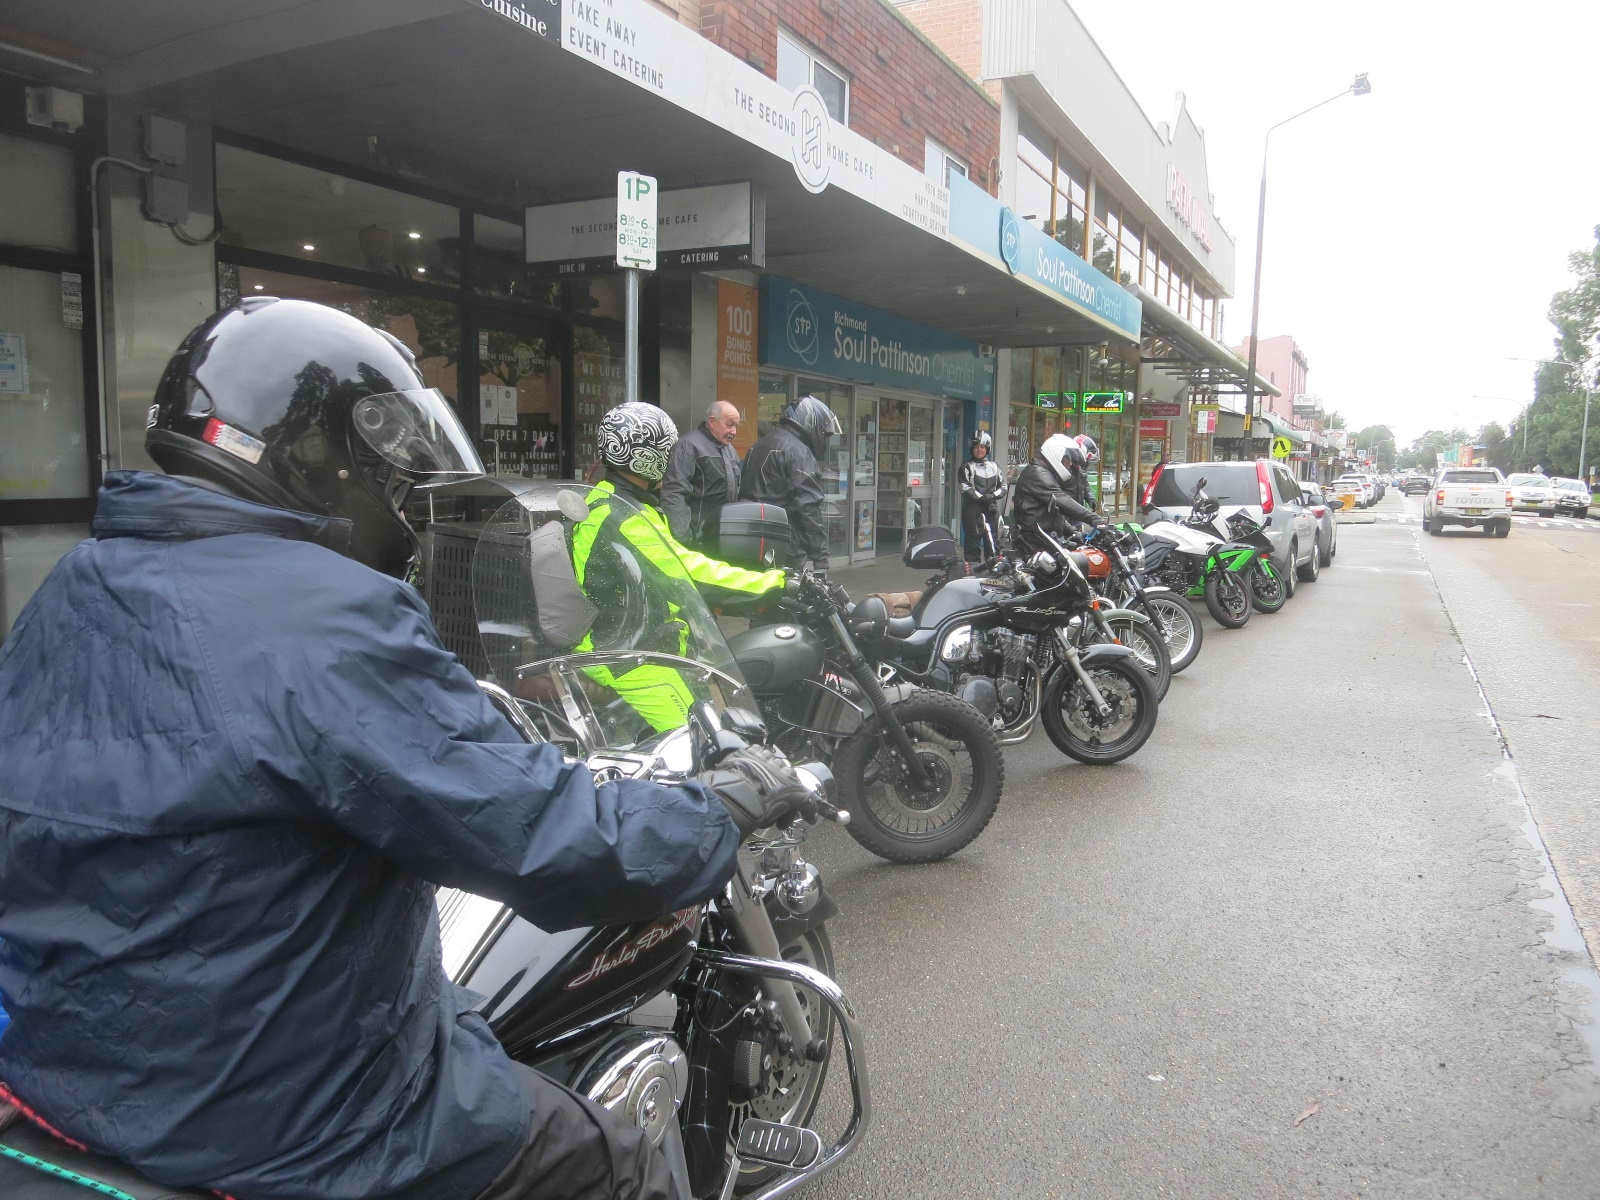 A group of motorcyclists are parked on the side of a street

Description automatically generated with medium confidence